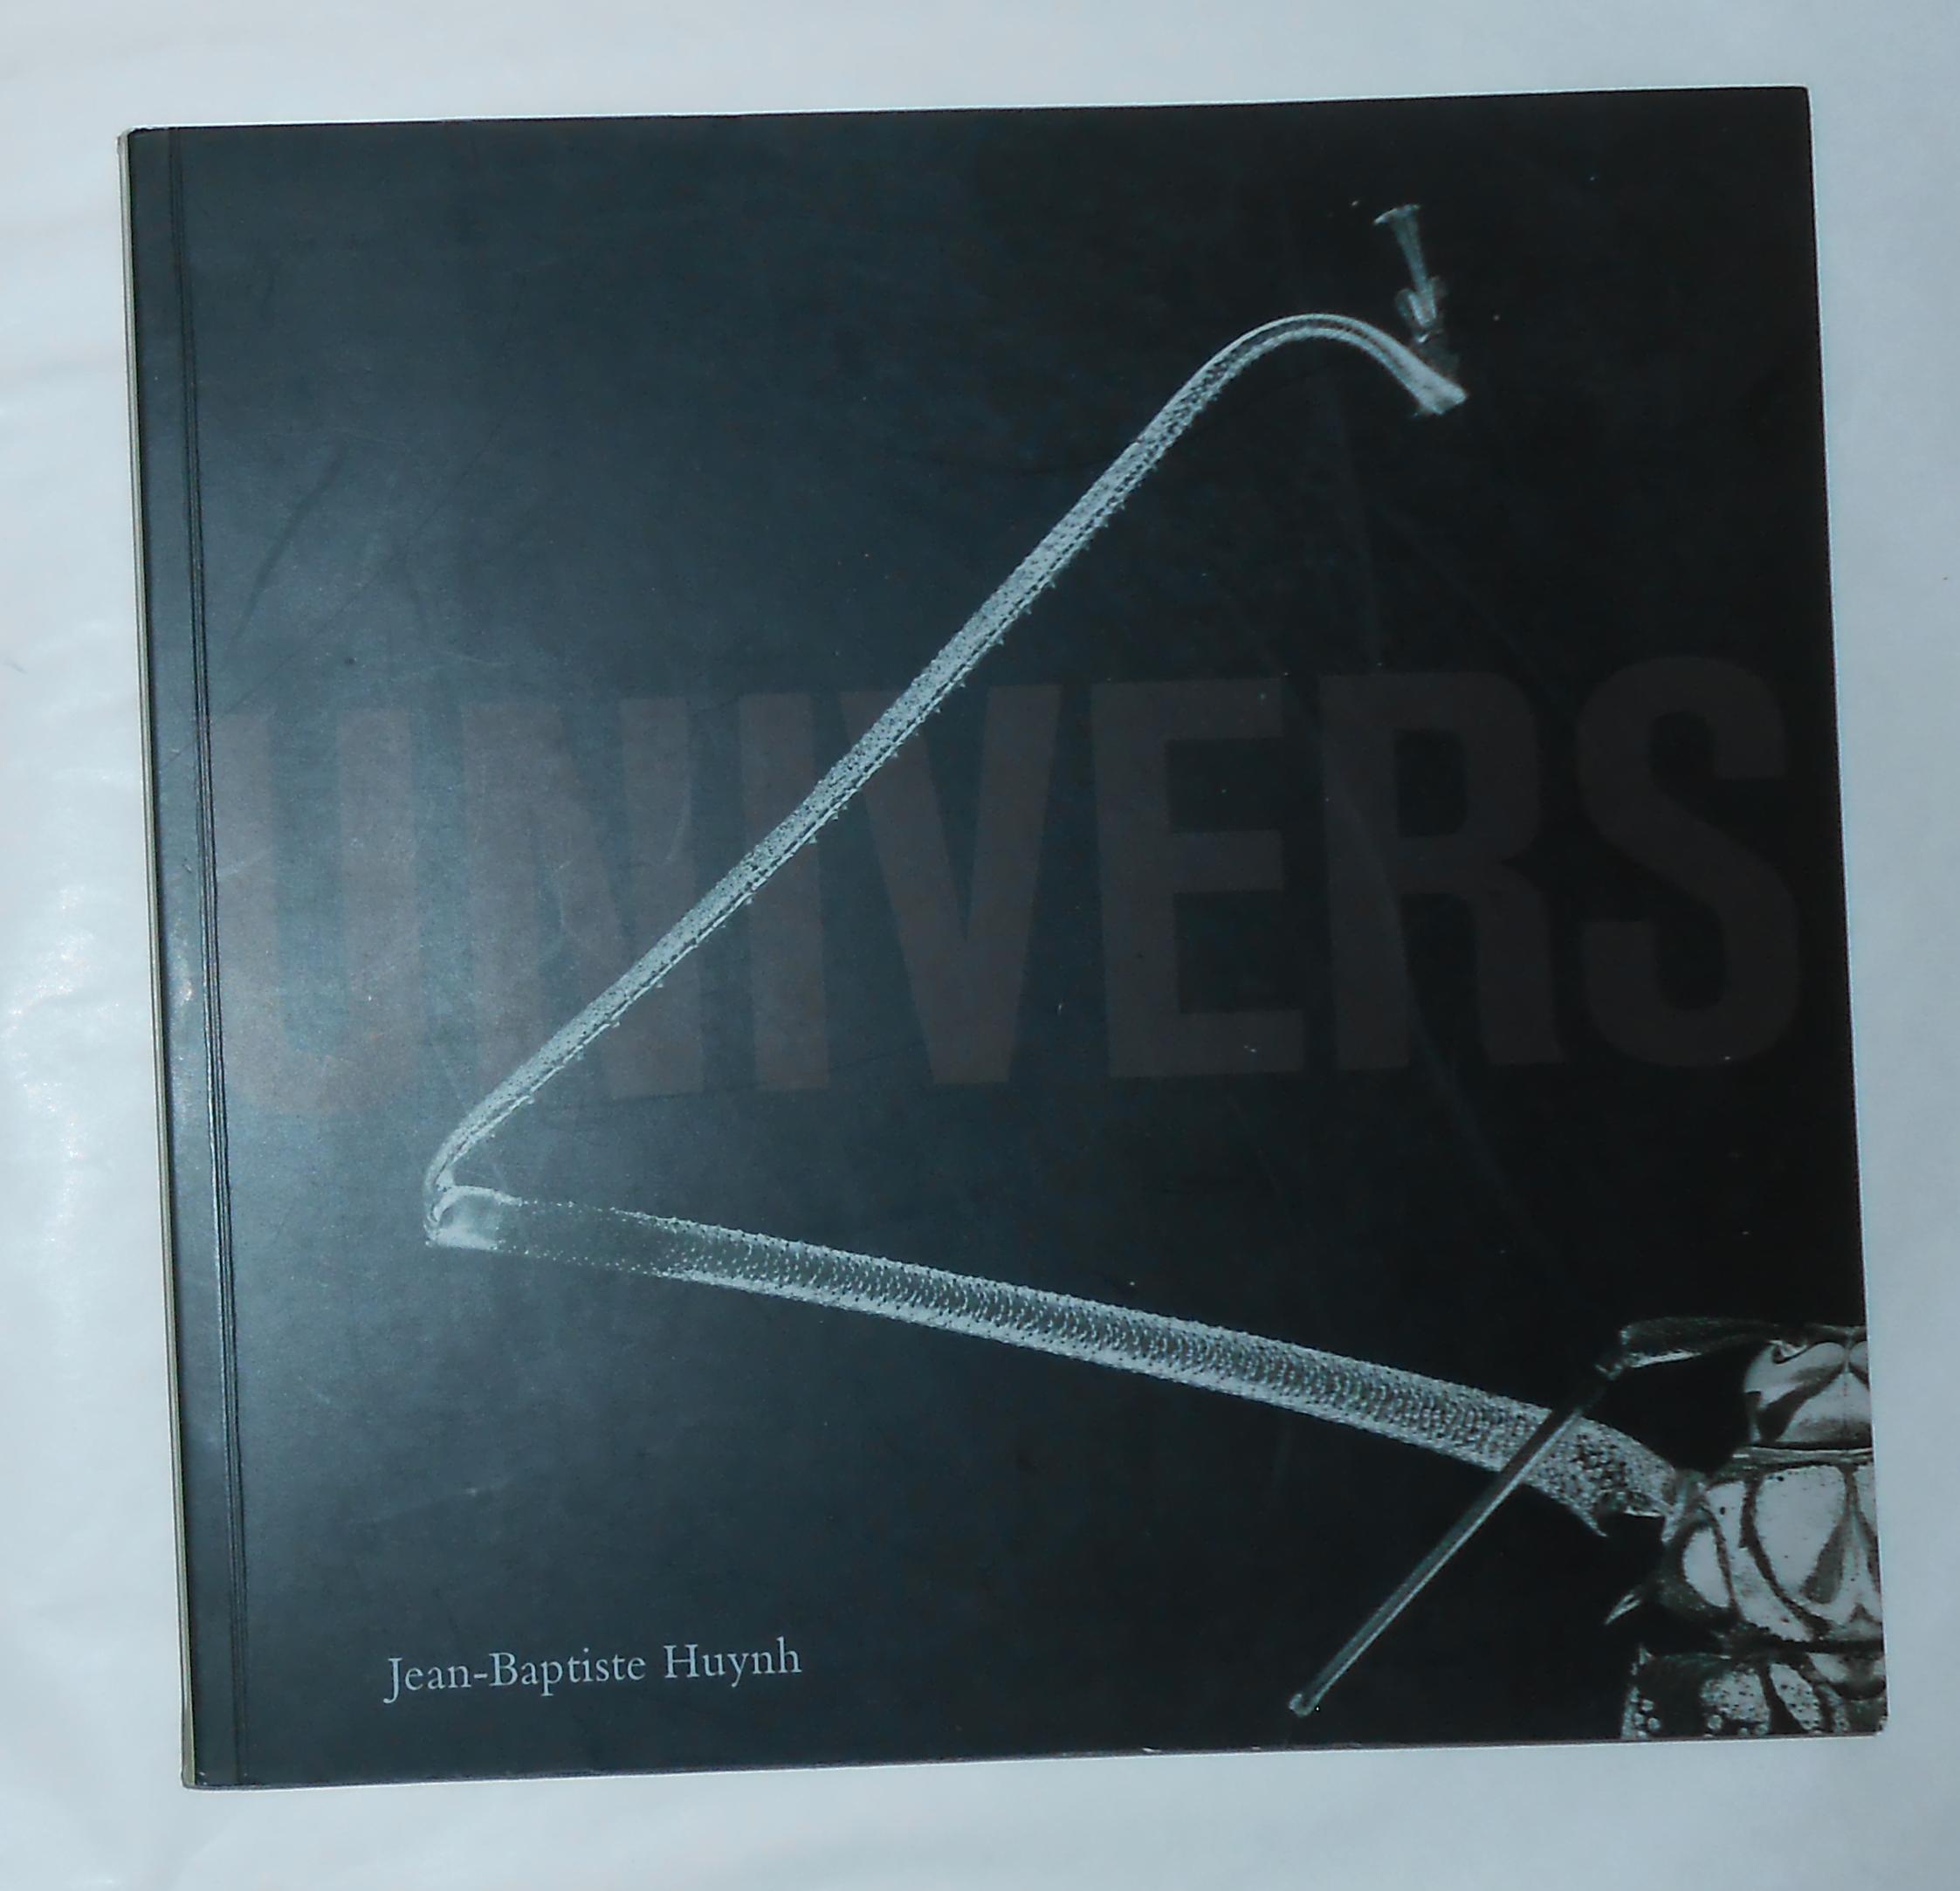 Univers - Photographs by Jean-Baptiste Huynh - Words by Urs Albrecht - HUYNH, Jean-Baptiste (photos) Urs Albrecht (text)